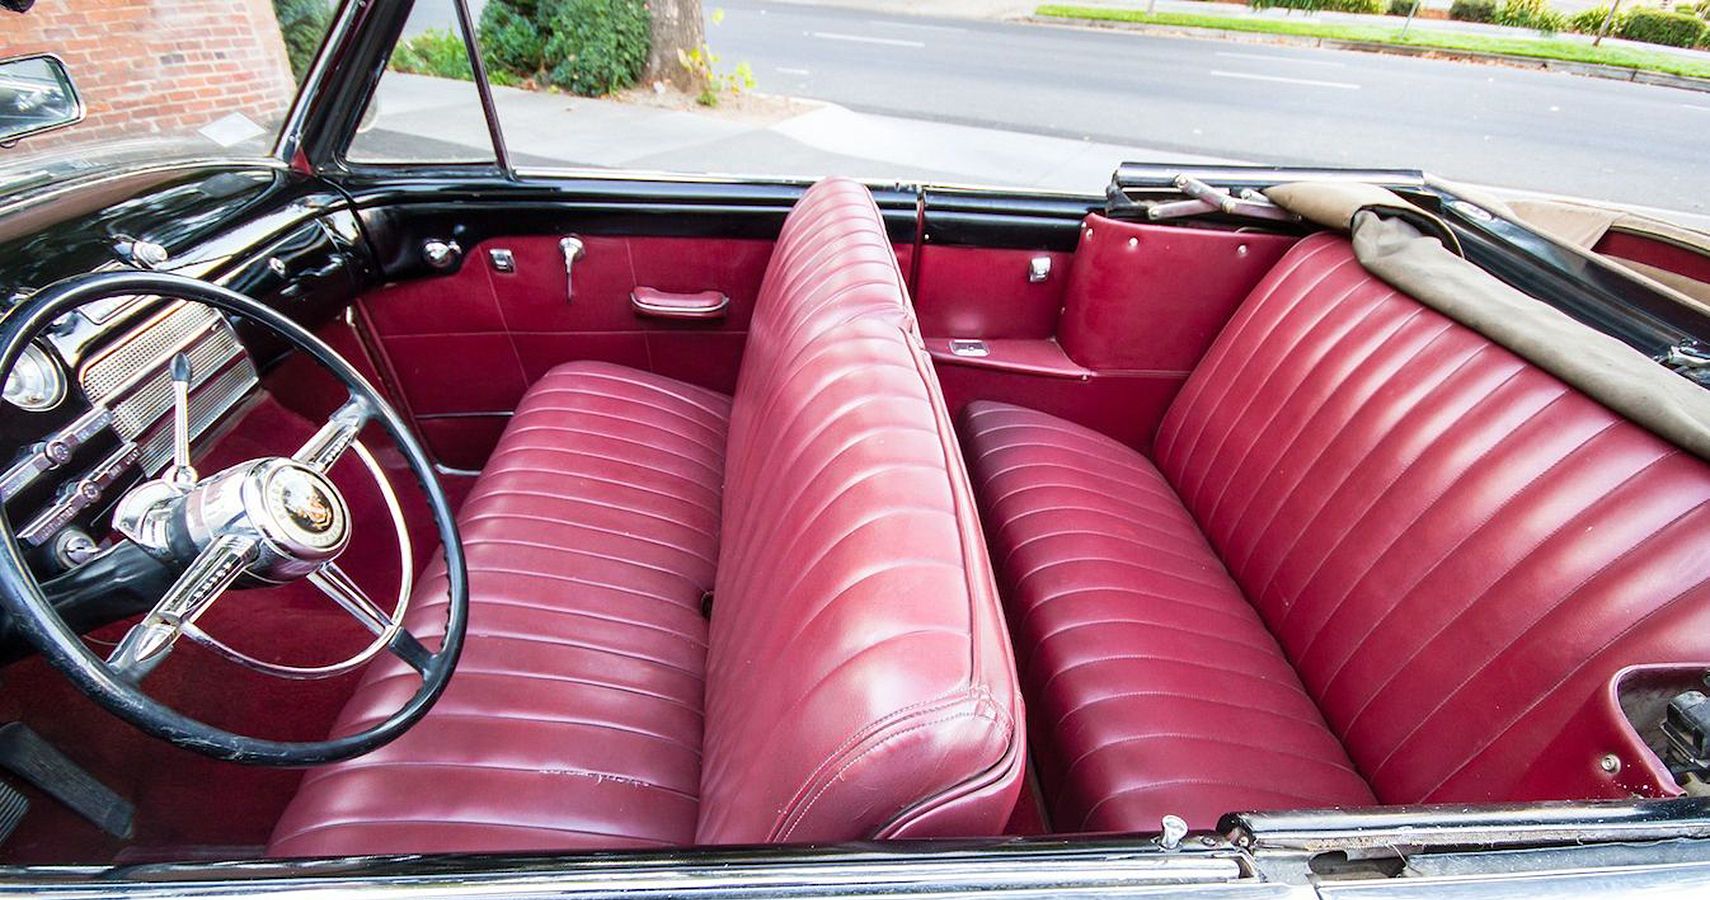 A Gorgeous Sequoia Cream Rain Man's 1949 Buick Roadmaster Bearing Red Leather Insides, Clearly, There Was One Thing Other Than The Charming Tom Cruise